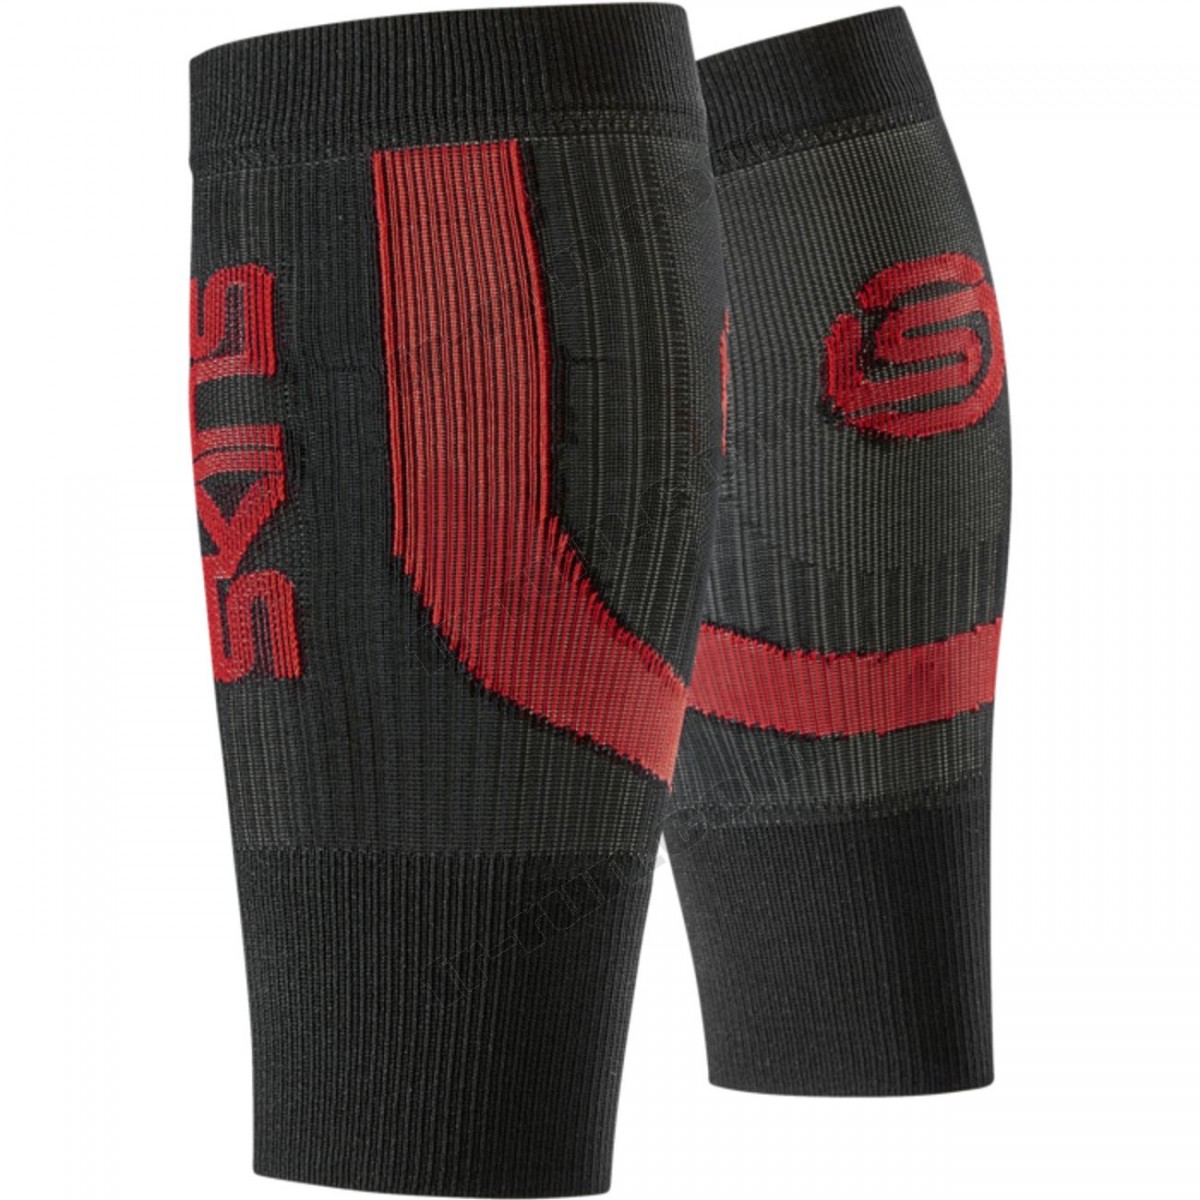 Skins/CHAUSSETTES running homme SKINS ACTIVE SEAMLESS CALF TIGHTS ◇◇◇ Pas Cher Du Tout - Skins/CHAUSSETTES running homme SKINS ACTIVE SEAMLESS CALF TIGHTS ◇◇◇ Pas Cher Du Tout